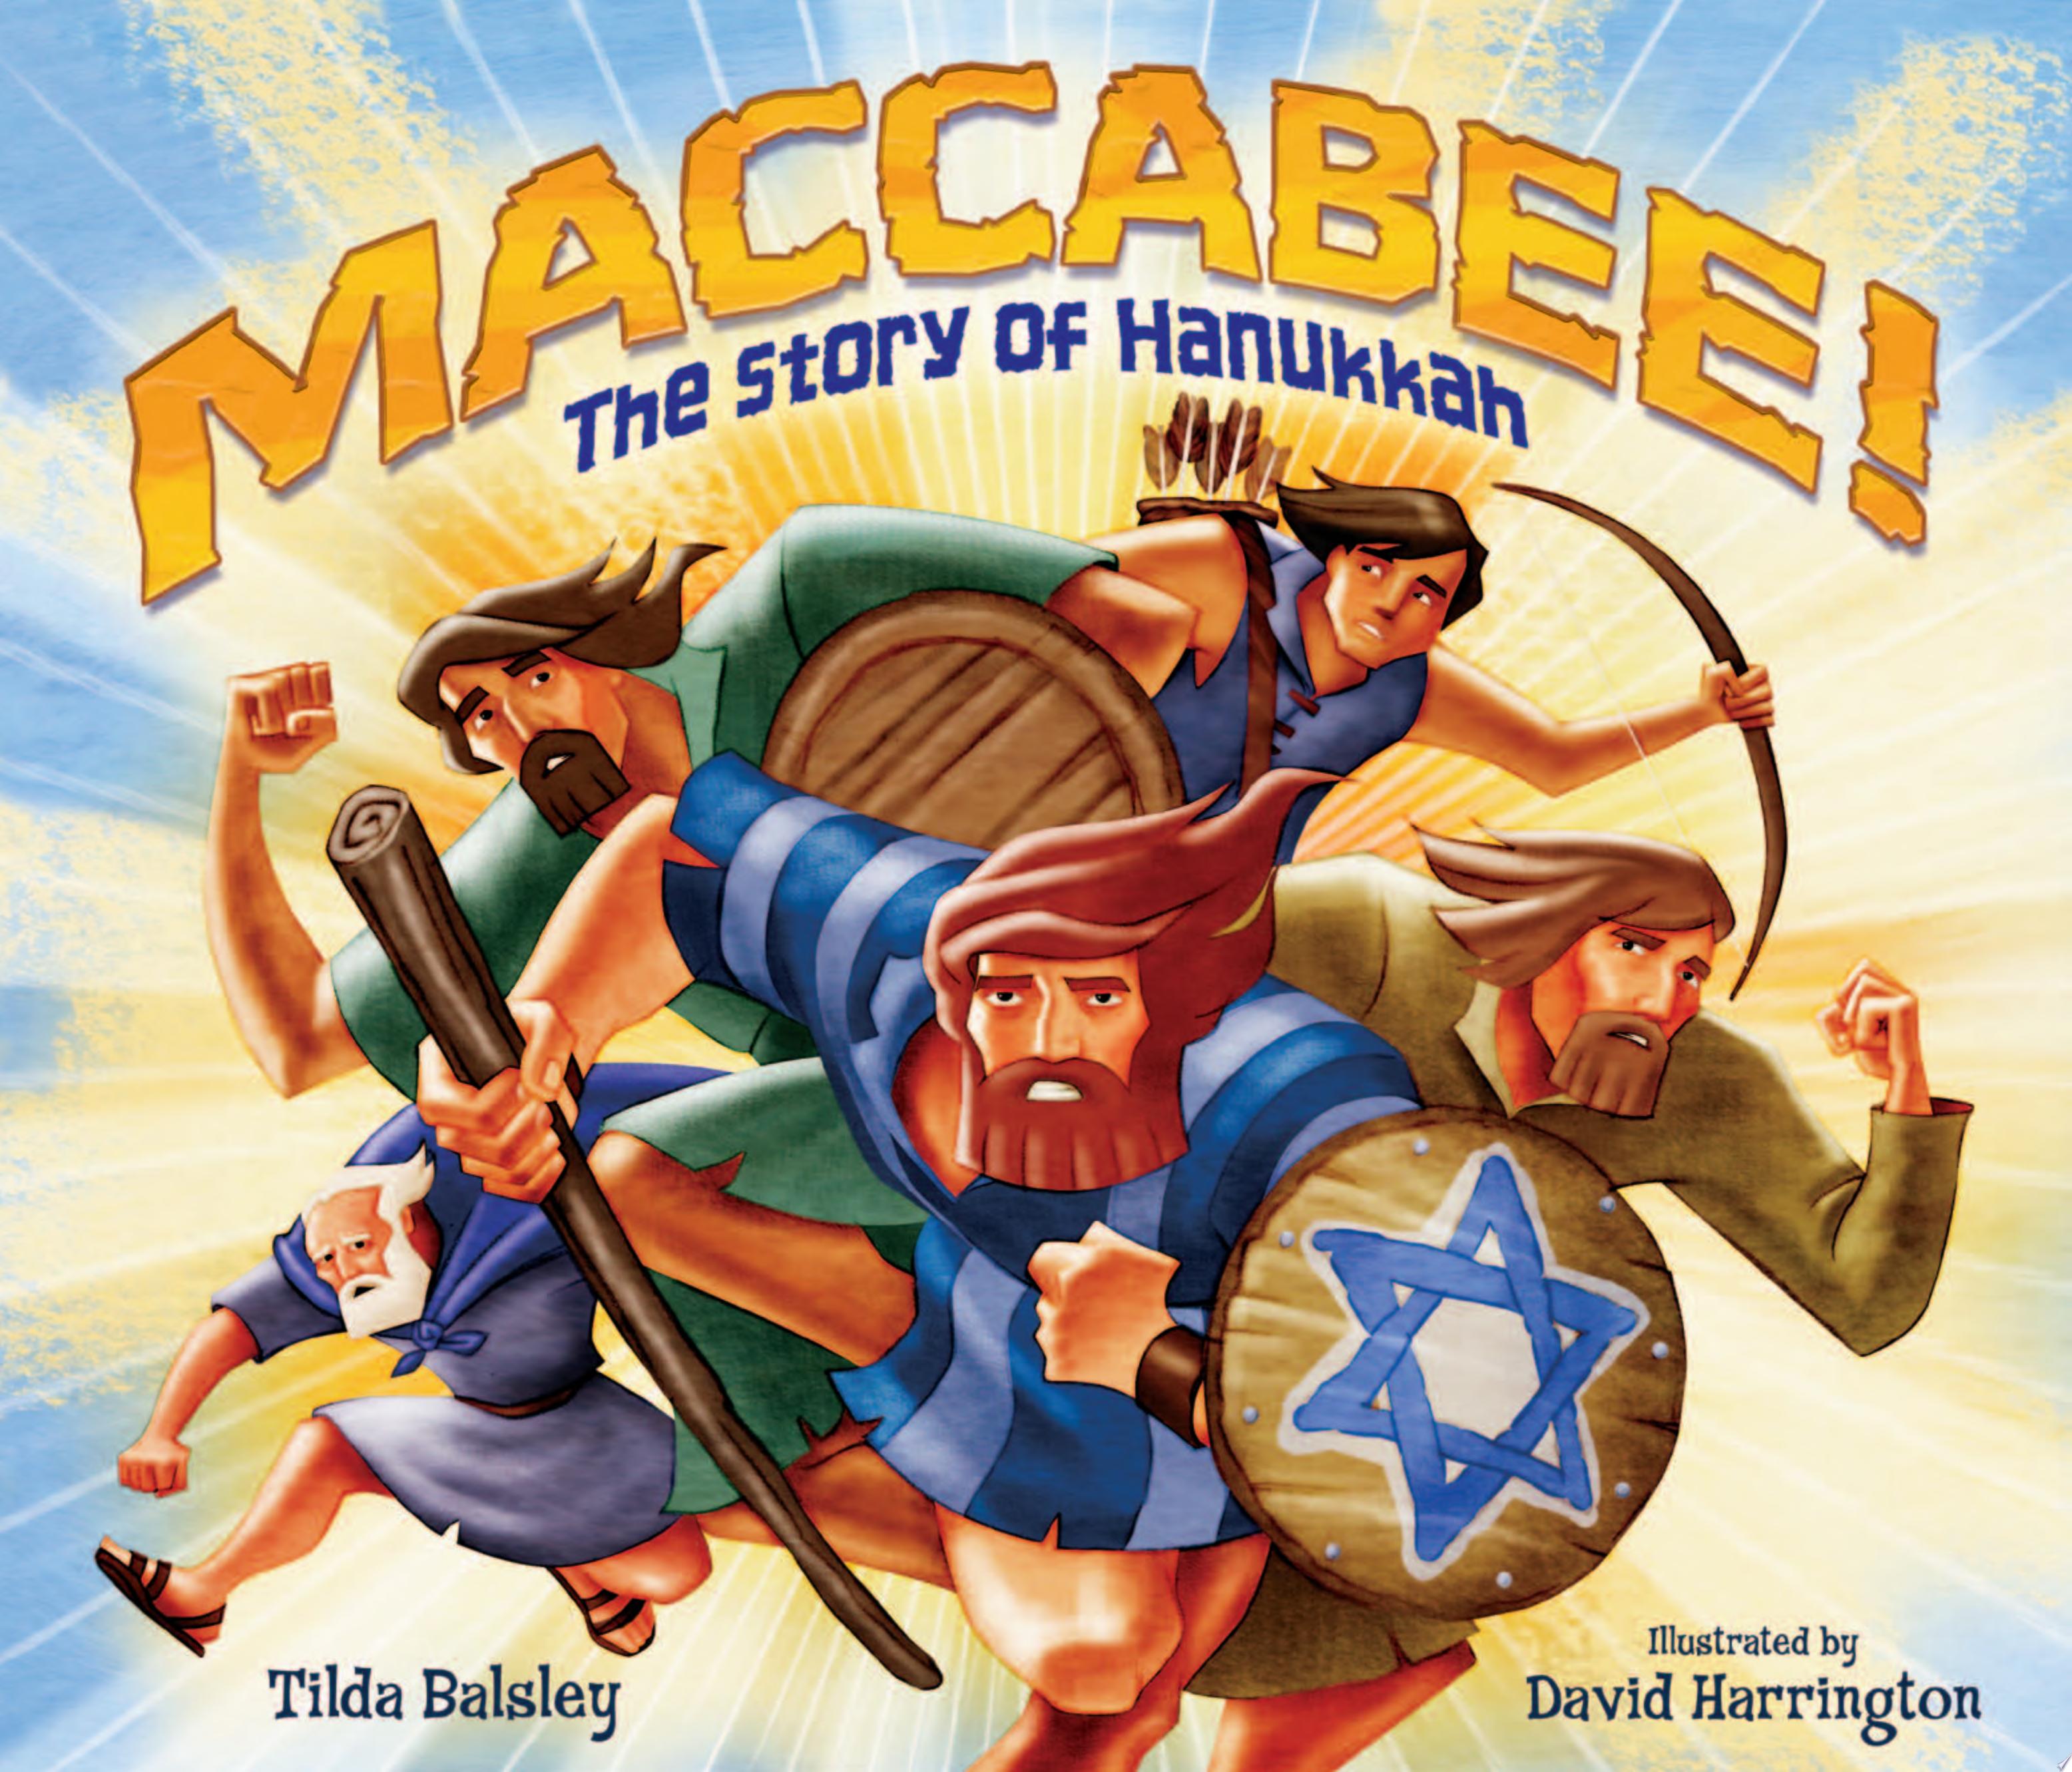 Image for "Maccabee!"